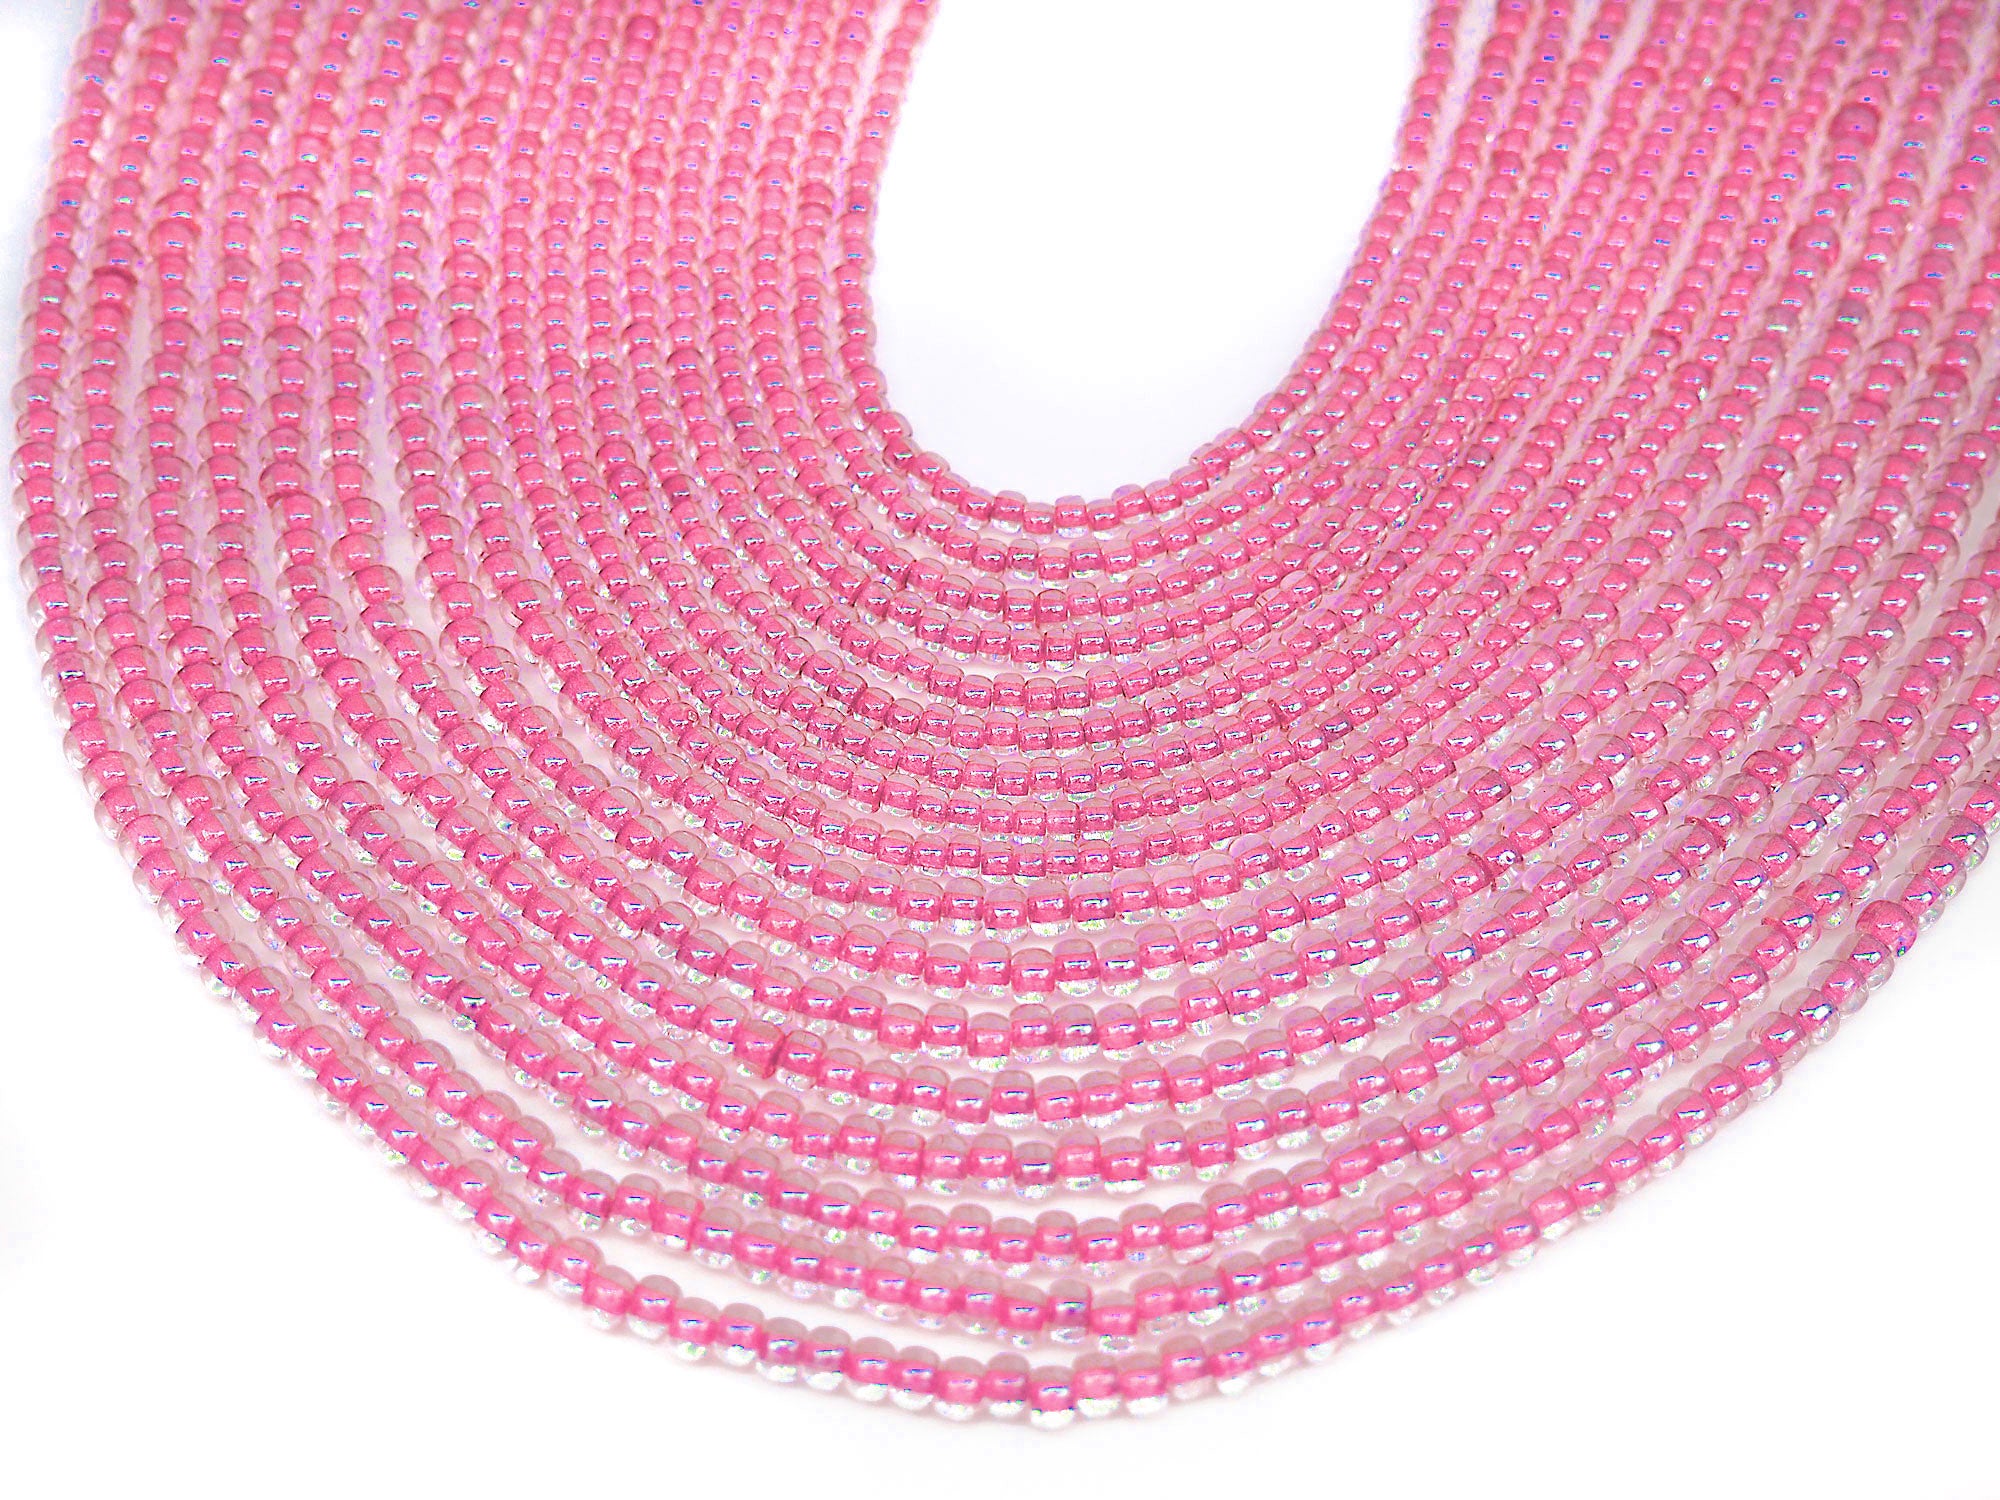 'Czech Round Smooth Pressed POPPY Glass Beads in Crystal Satin Light Pink Lined color, 2x3mm (size 8/0), 3x4mm (size 6/0) Druk Bead